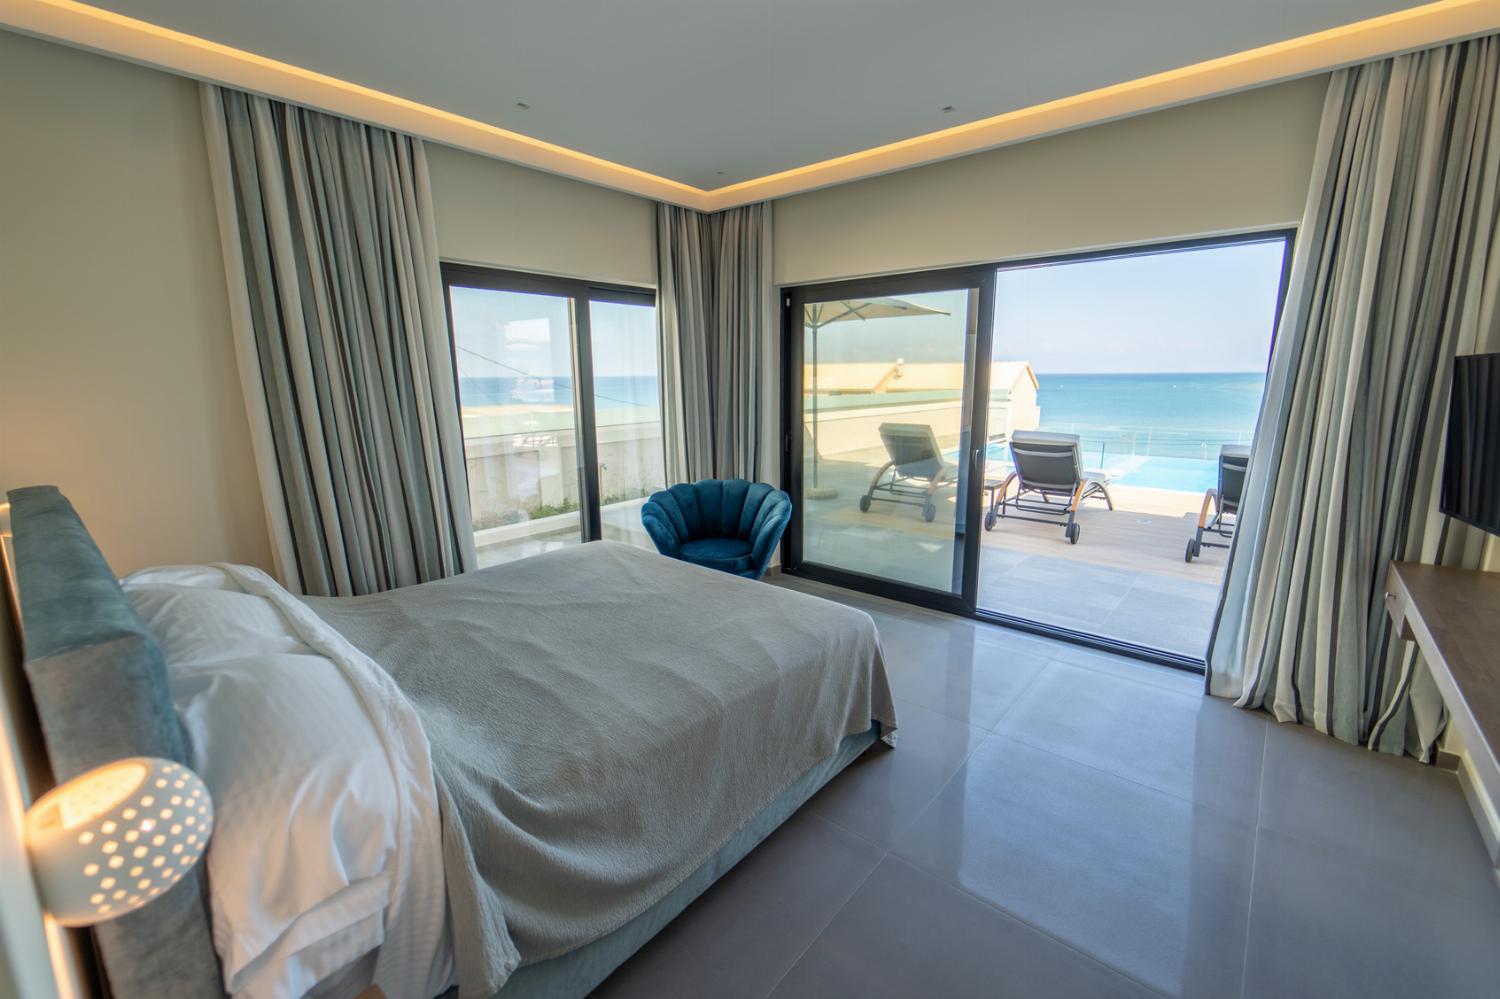 Double bedroom with A/C and upper terrace access with panoramic sea views